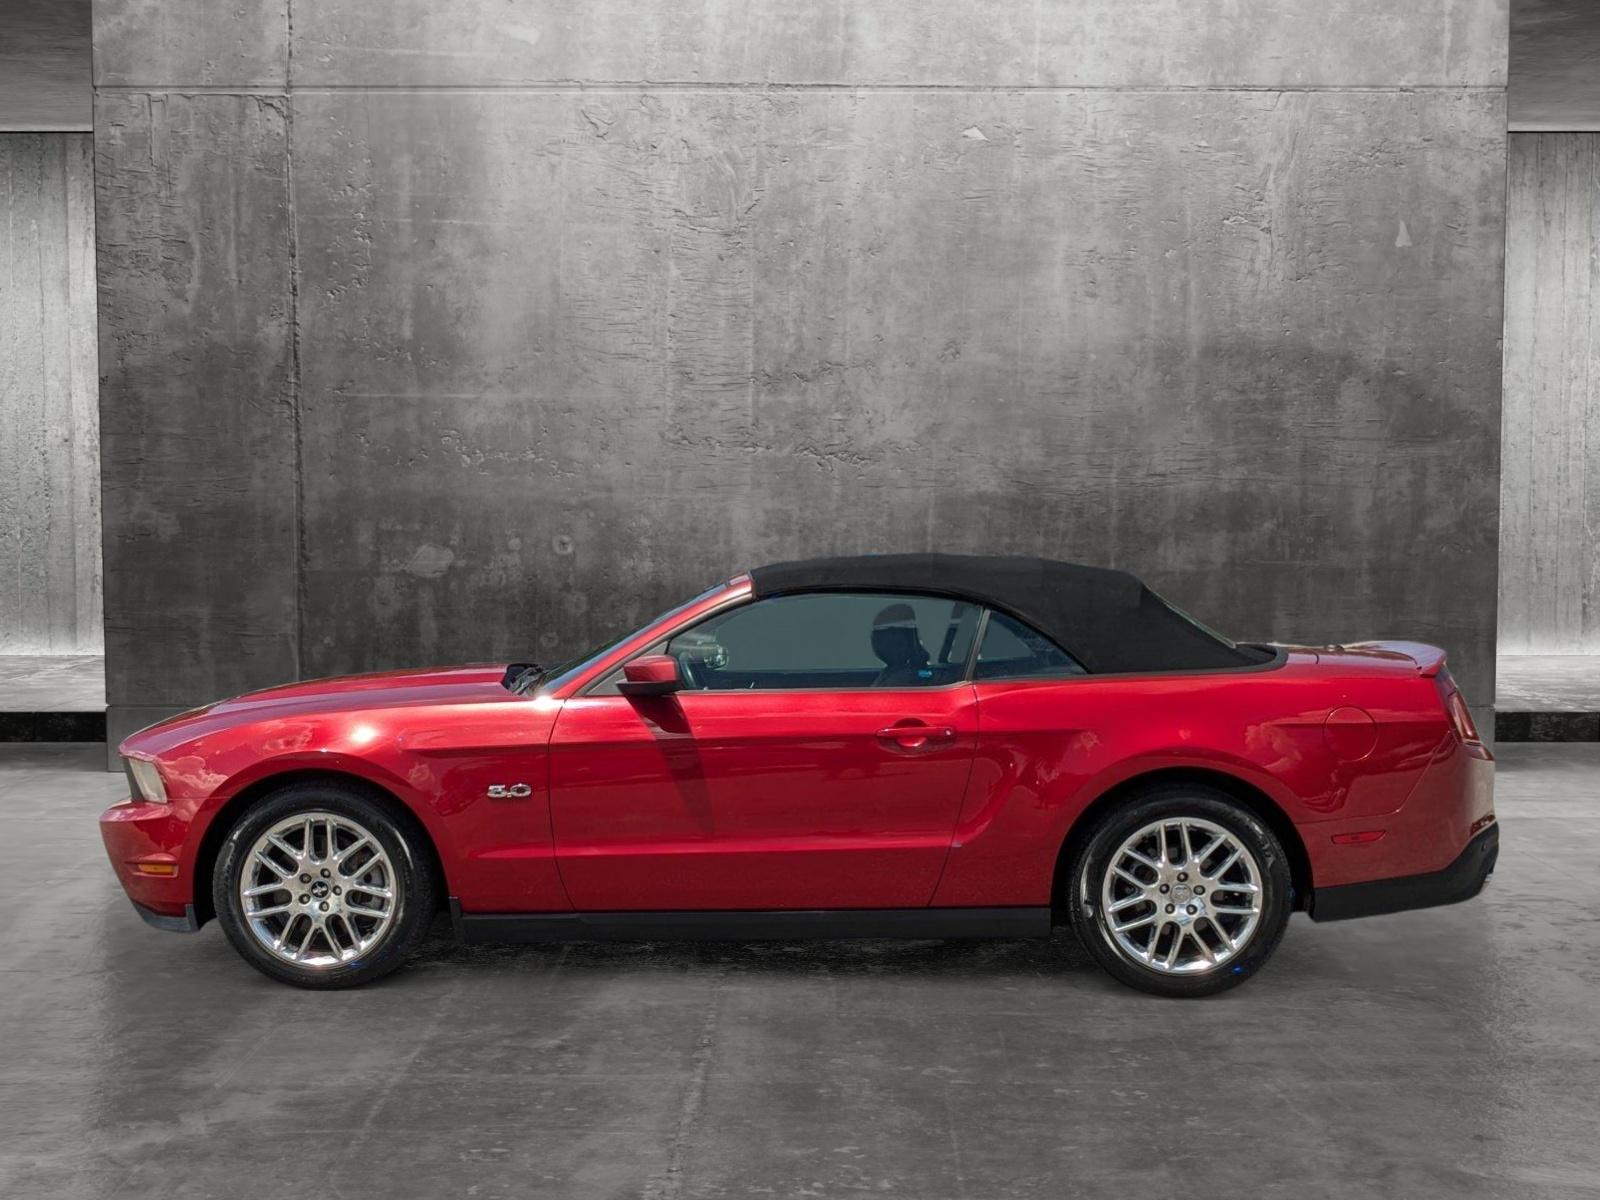 2012 Ford Mustang Vehicle Photo in St. Petersburg, FL 33713